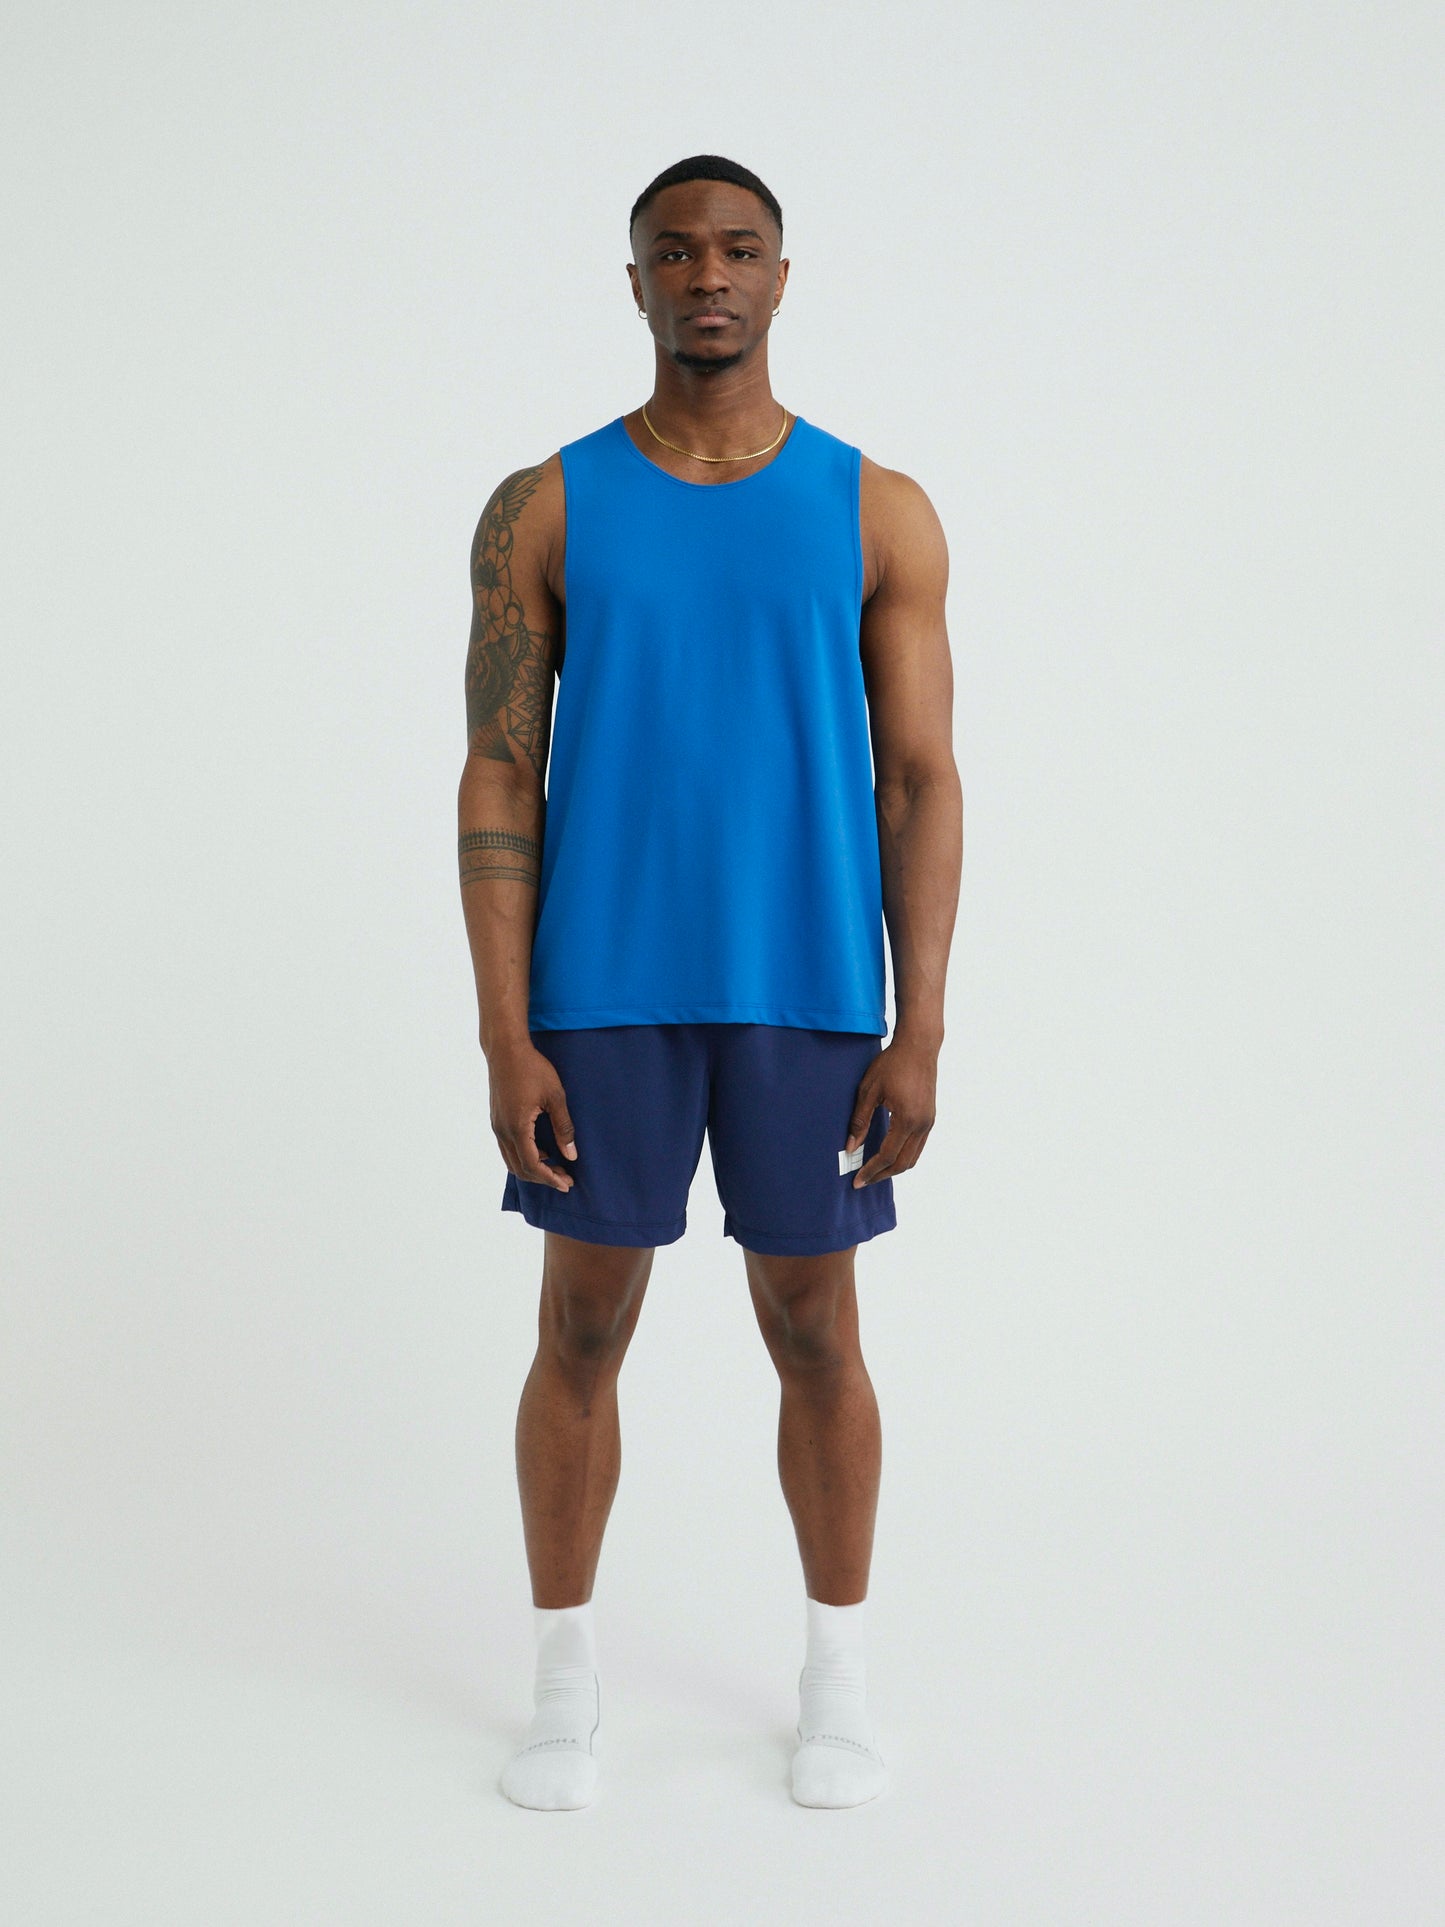 Mens Premium Athletic Tank Made in NYC - Blue